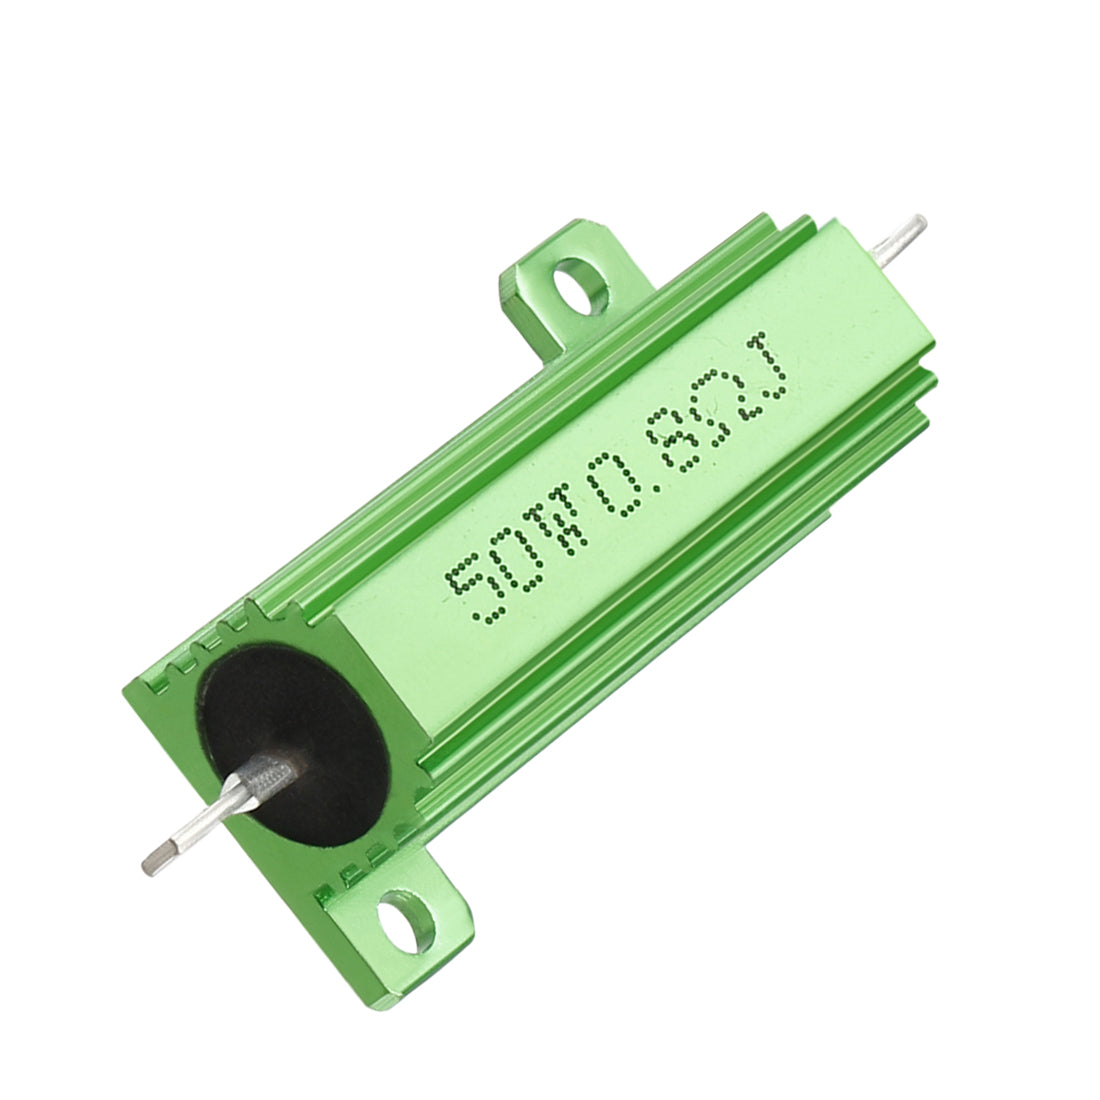 uxcell Uxcell 50W 0.8 Ohm 5% Aluminum Housing Resistor Screw  Chassis Mounted Aluminum Case Wirewound Resistor Load Resistors Green 2 pcs